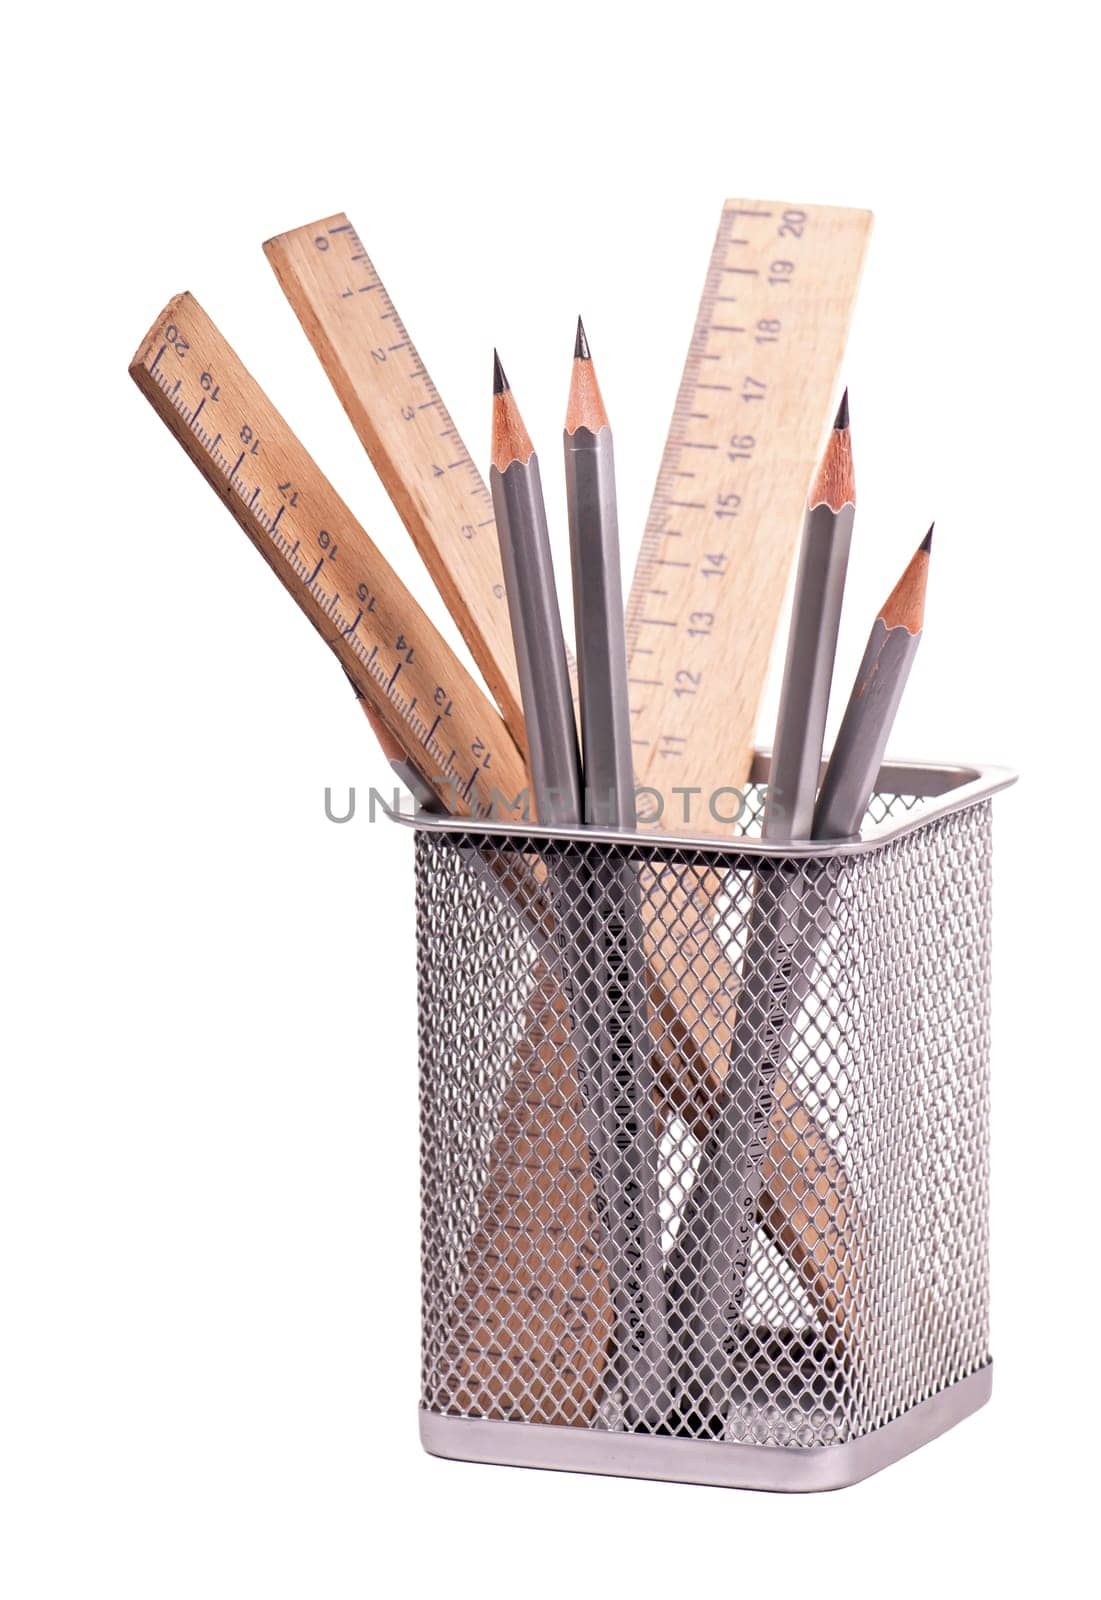 Some gray pencils and wooden rulers in office support on a white by aprilphoto